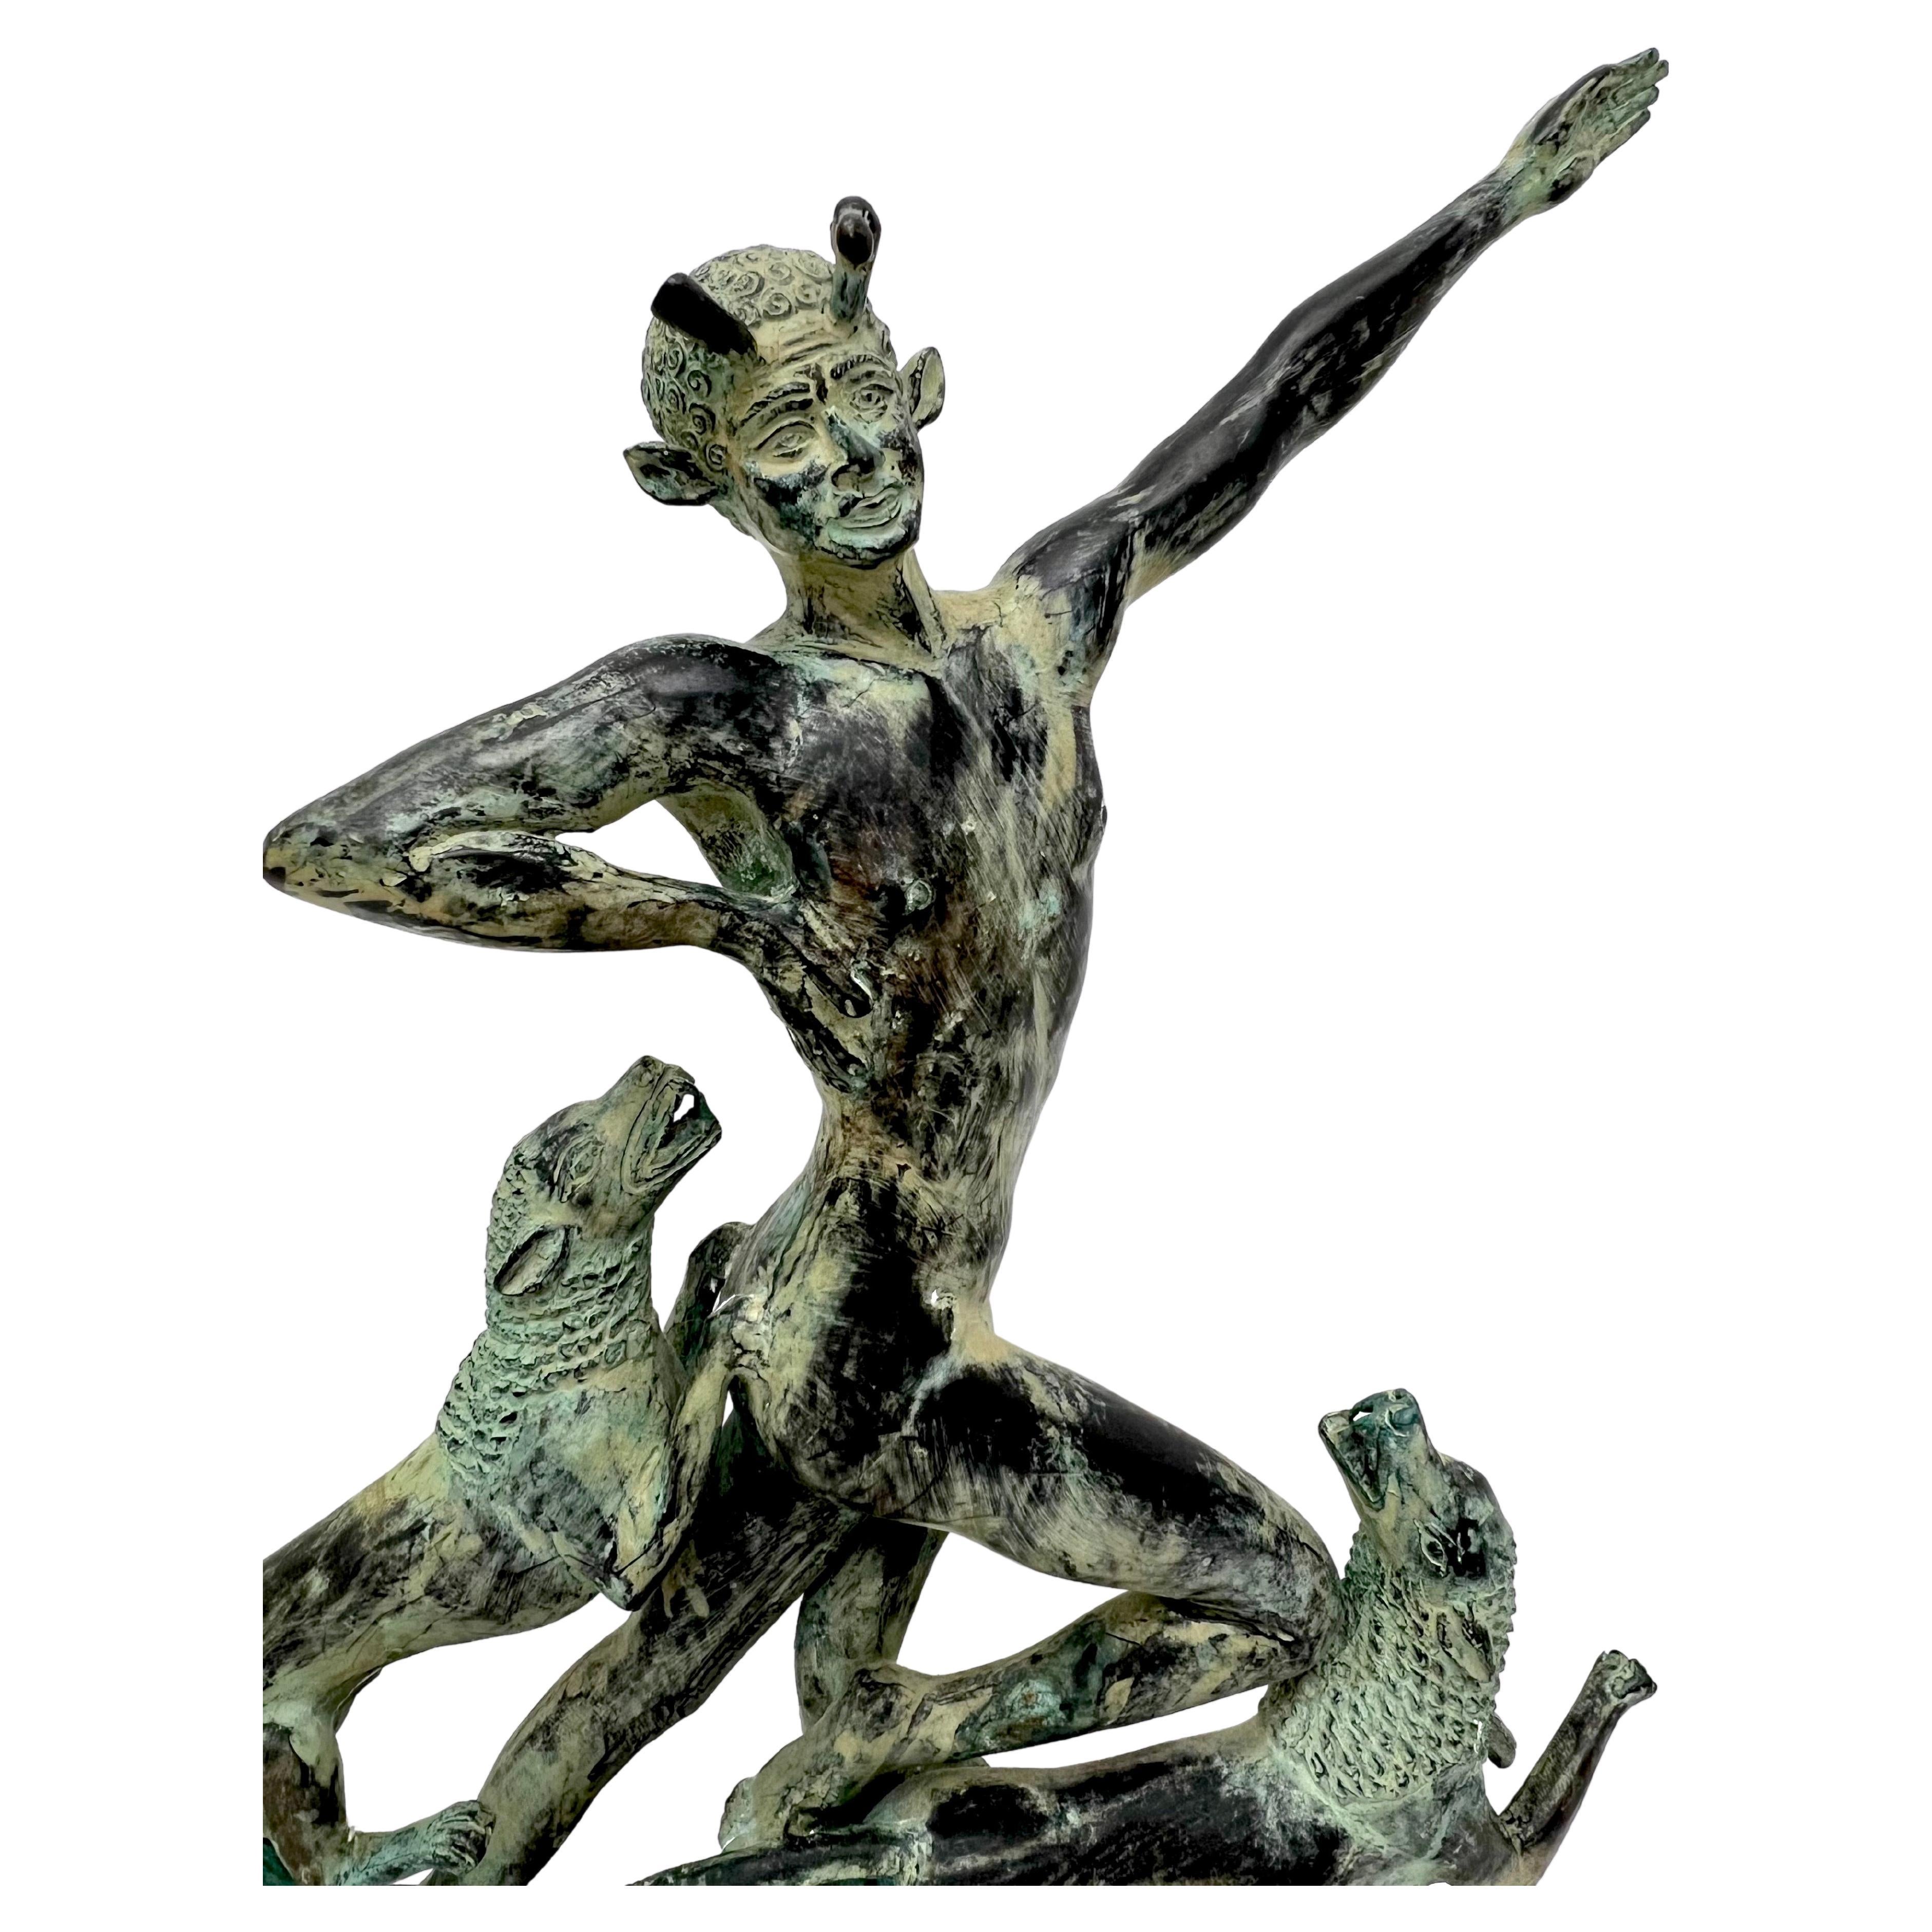 Fabulous Art Deco Sculpture after Paul Manship (1885–1966) of Actaeon and his dogs as he transform from man into stag.  
Manship had an ongoing fascination with Greek and Roman mythology. A Prix de Rome scholarship in 1909 had enabled him to study